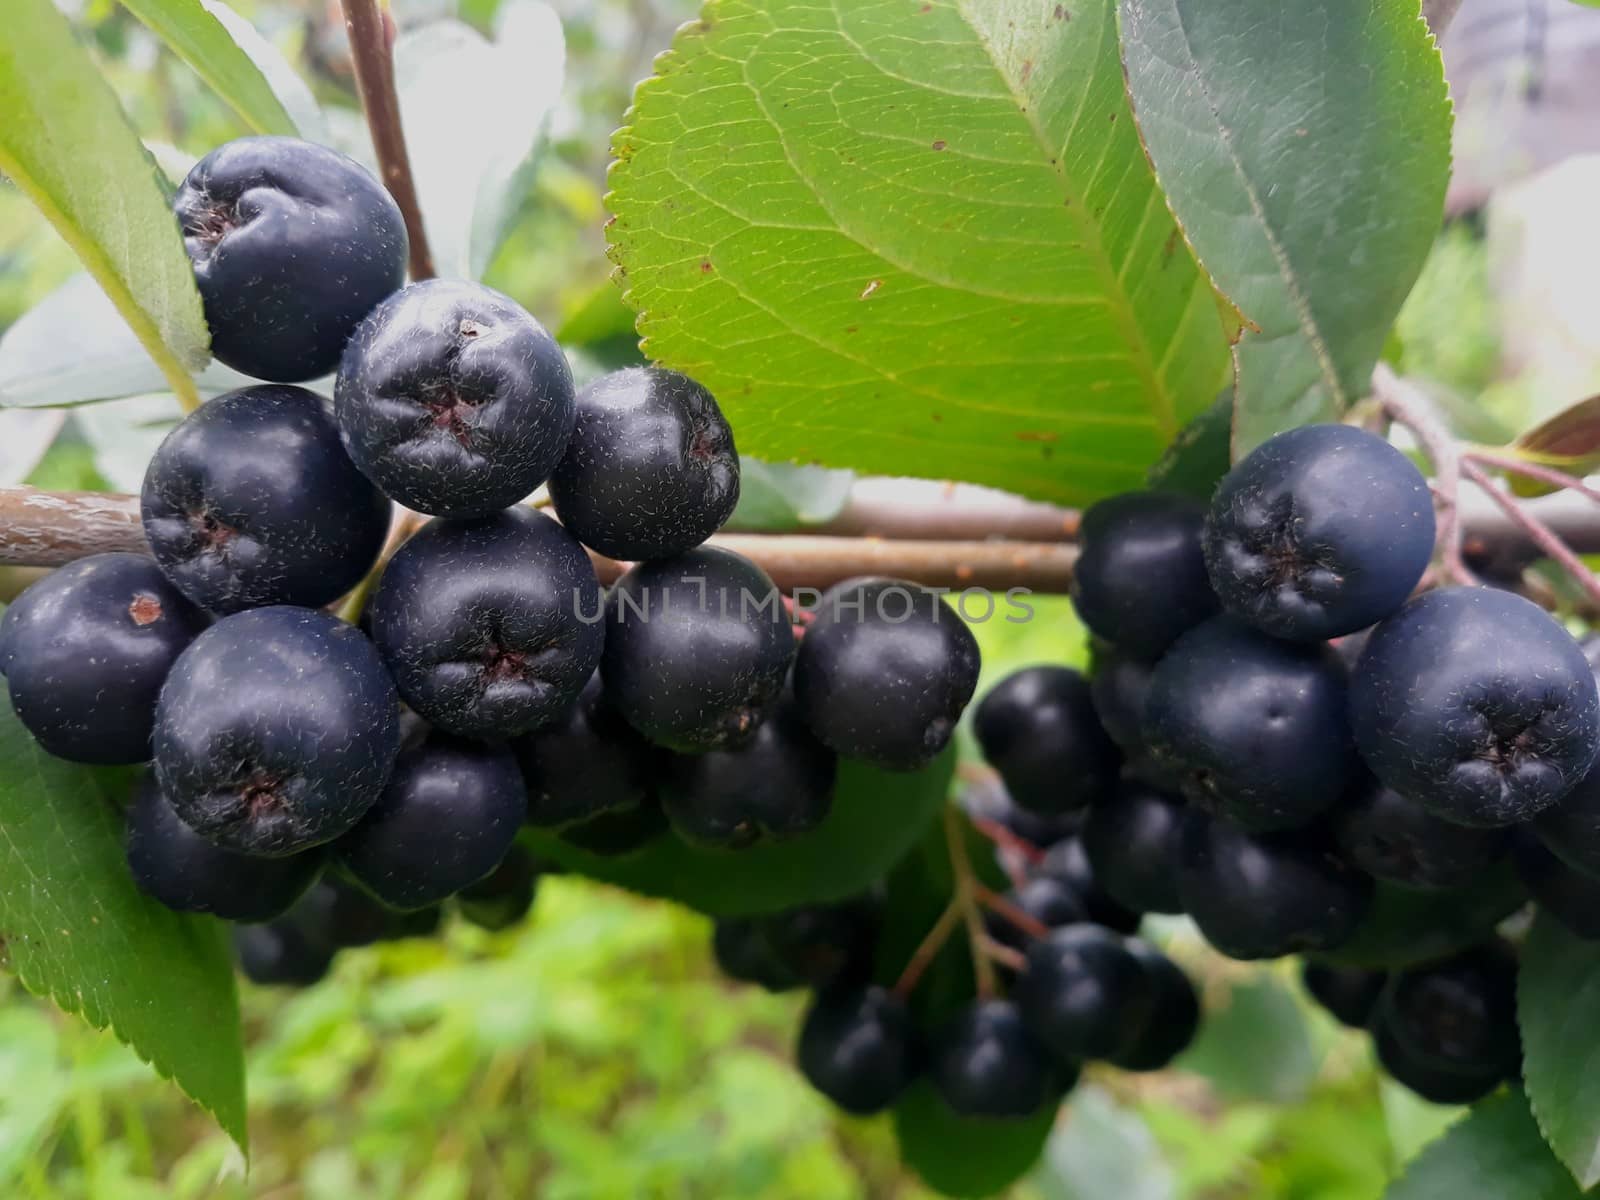 fresh aronia berries on the branch